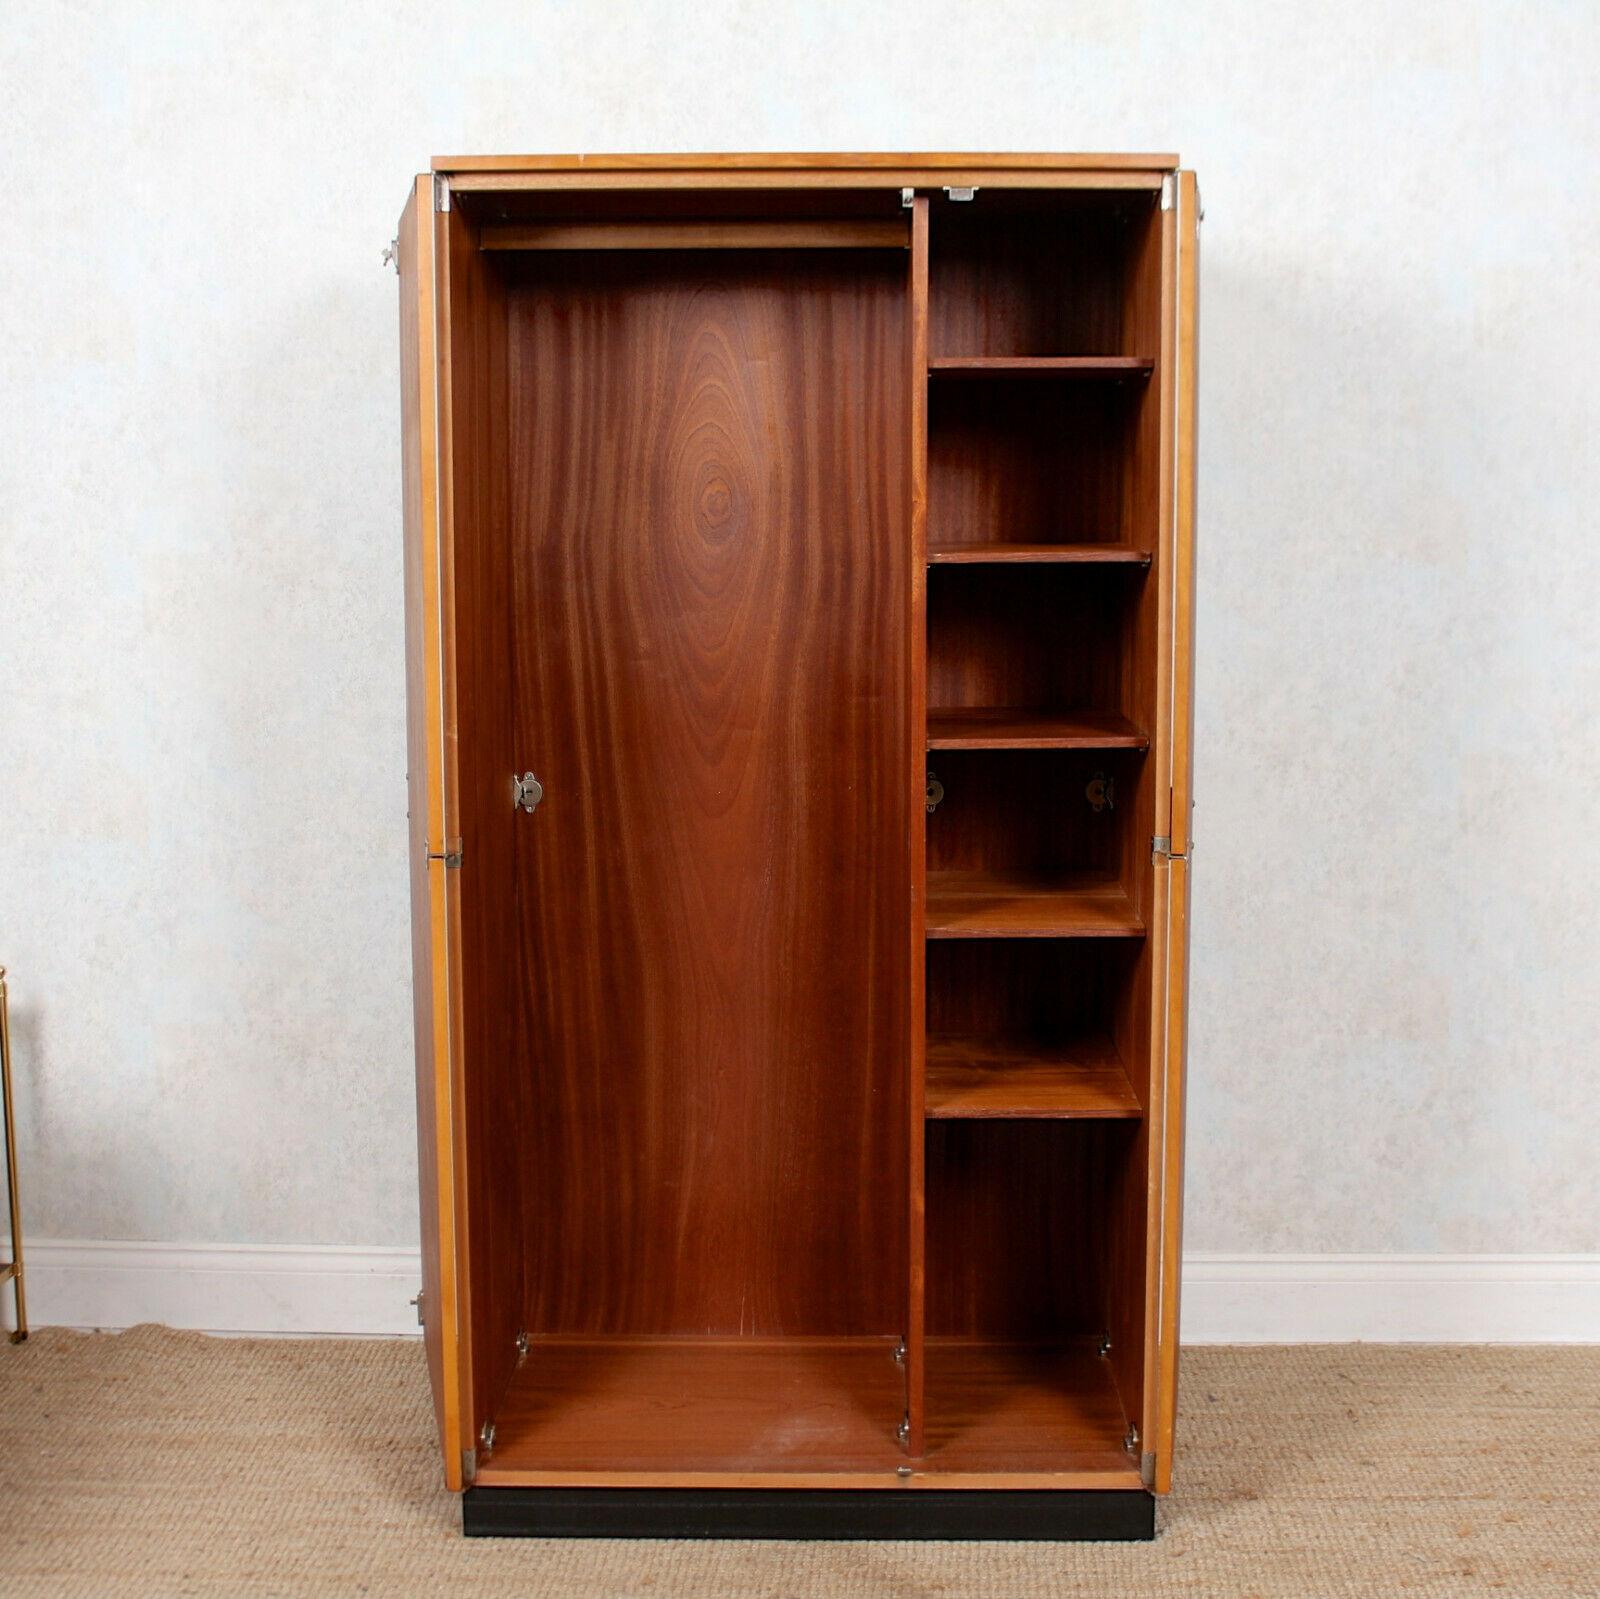 An impressive and rare model compactum wardrobe by Stage.
The fully retractable doors, mounted with good original handles, enclosed hanging rail, shelving and raised on an ebonized plinth base.
England, circa 1975.